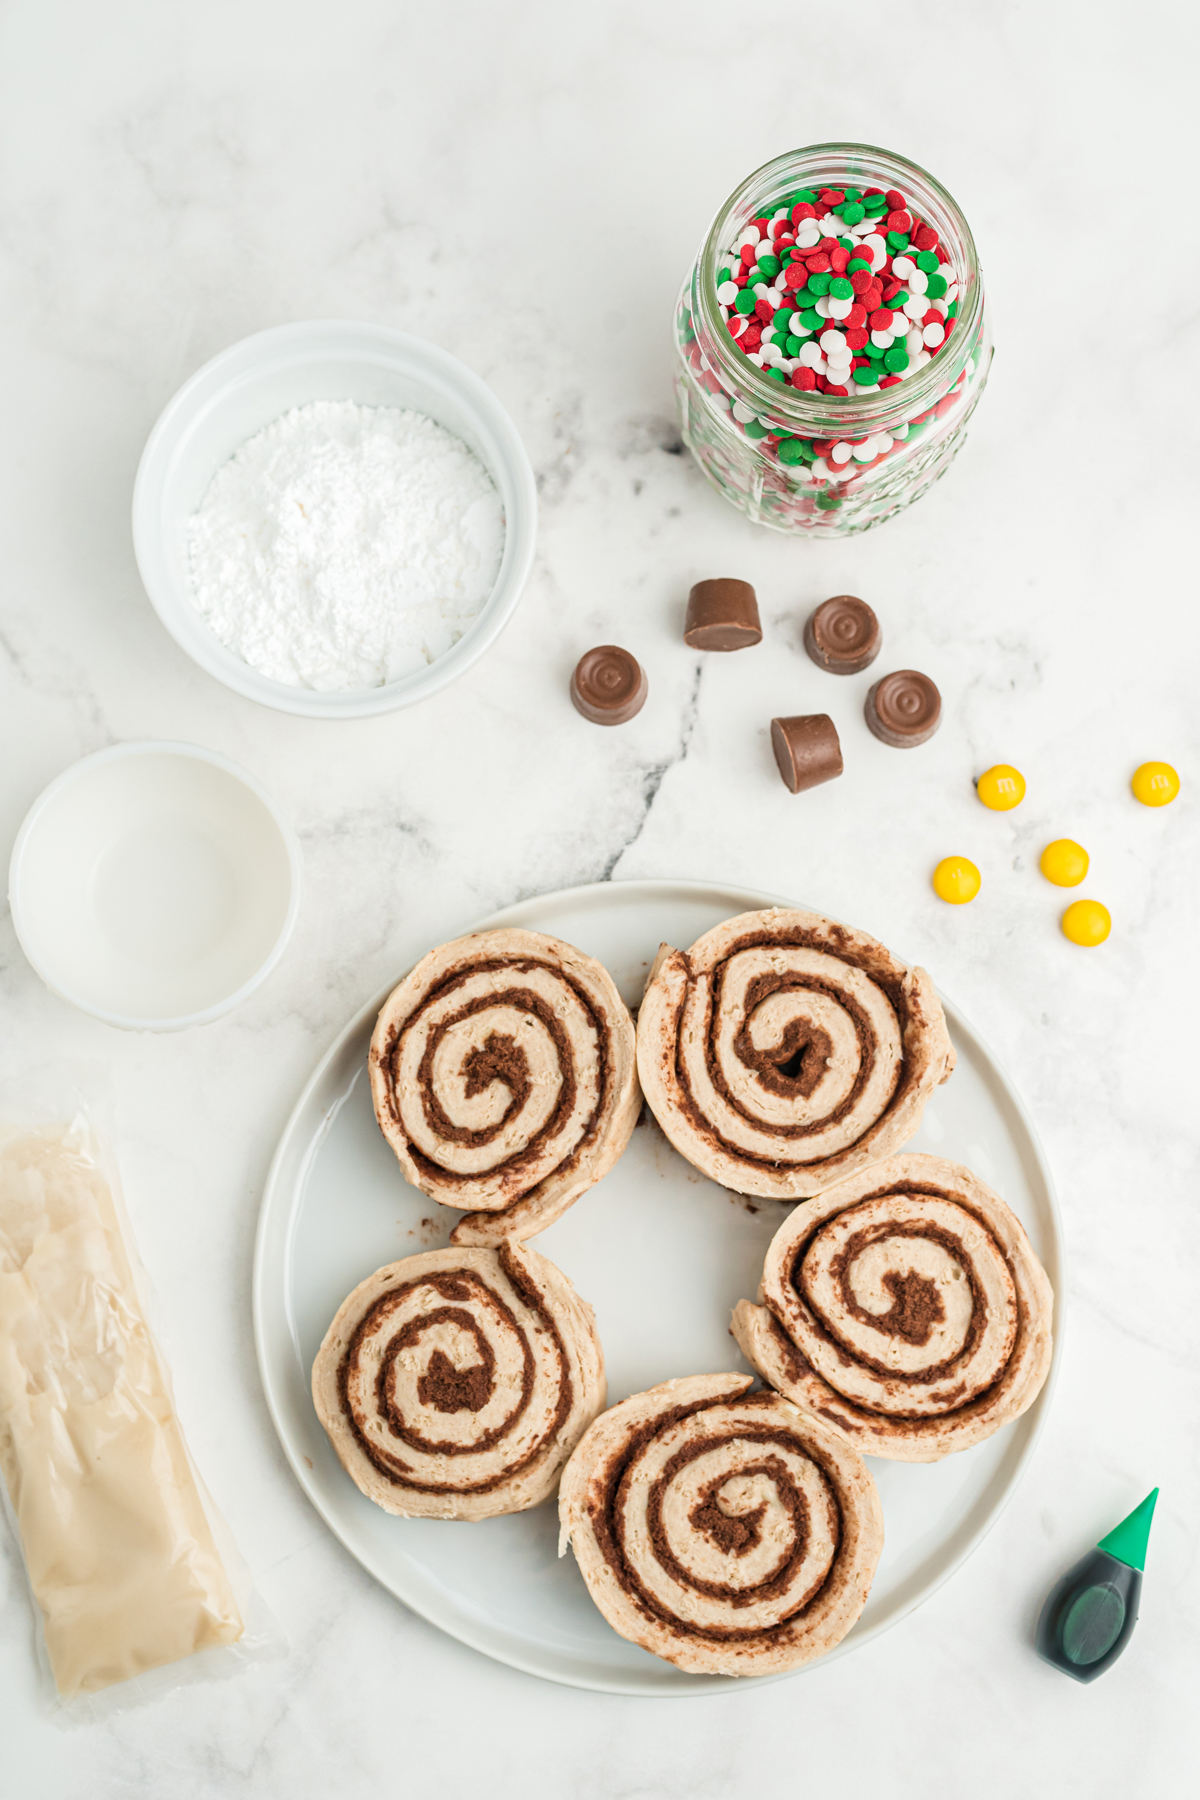 Ingredients of Christmas Tree Cinnamon Rolls on a white counter. These are the following: refrigerated cinnamon rolls, confectioner's sugar, water, green food coloring gel, Christmas sprinkles, yellow M&Ms, miniature peanut butter cups or Rolo candies unwrapped. 